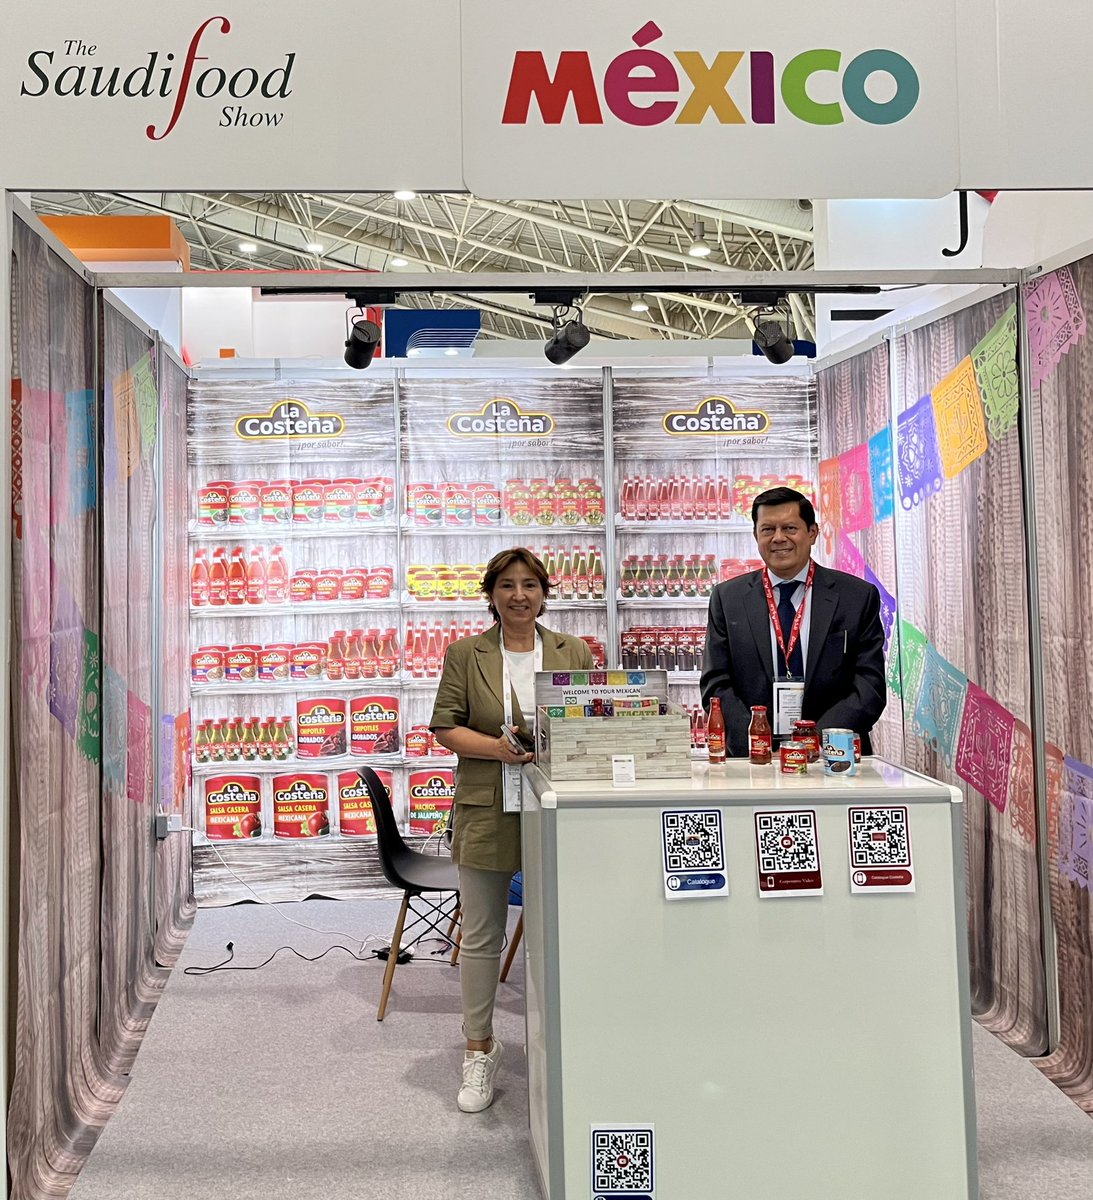 From June 20-22, @SaudiFoodShow / @Gulfood, held its first edition in #Riyadh #SaudiArabia . “La Costeña” was the pioneer 🇲🇽 company to exhibit. I am sure more Mexican companies will follow in 2024.